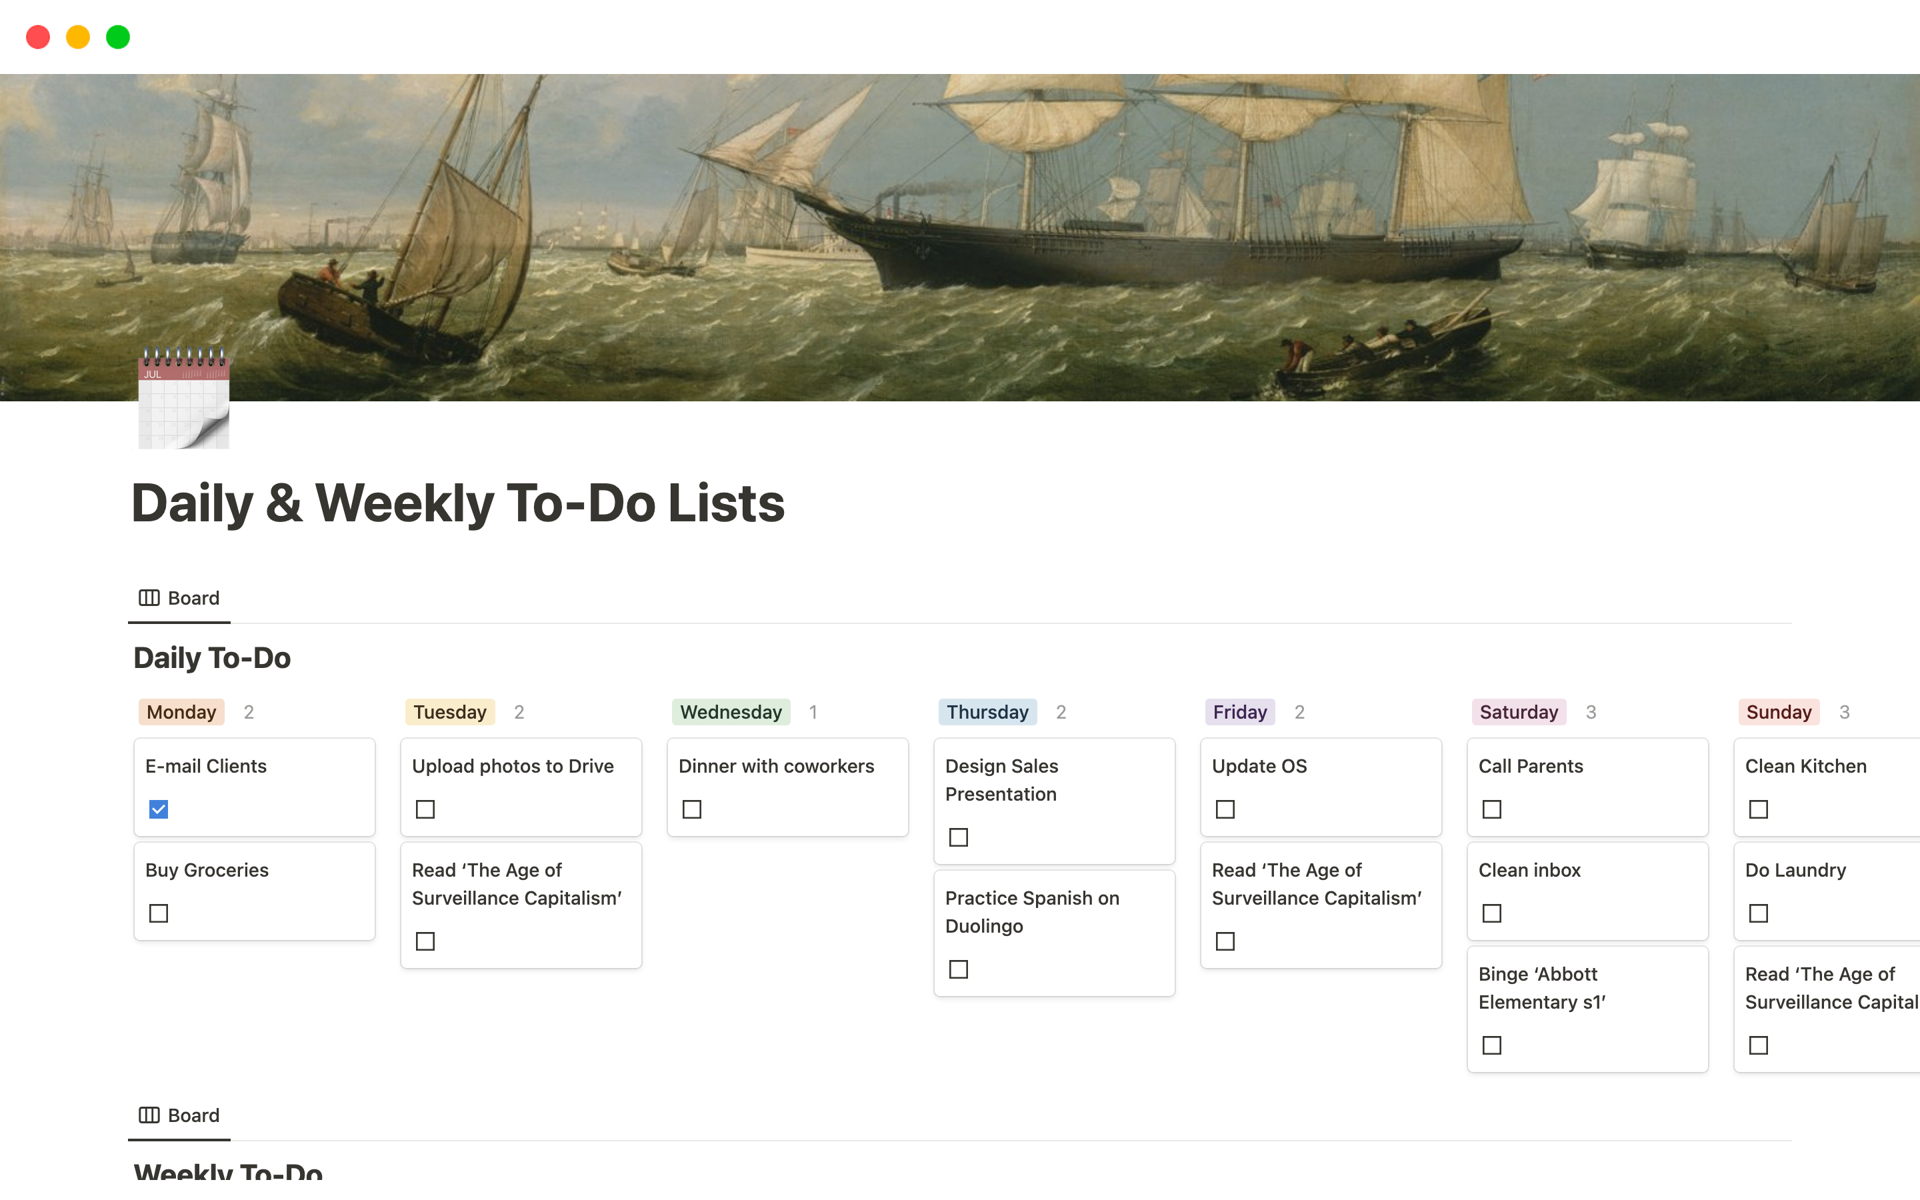 Daily & Weekly To-Do Listsのテンプレートのプレビュー